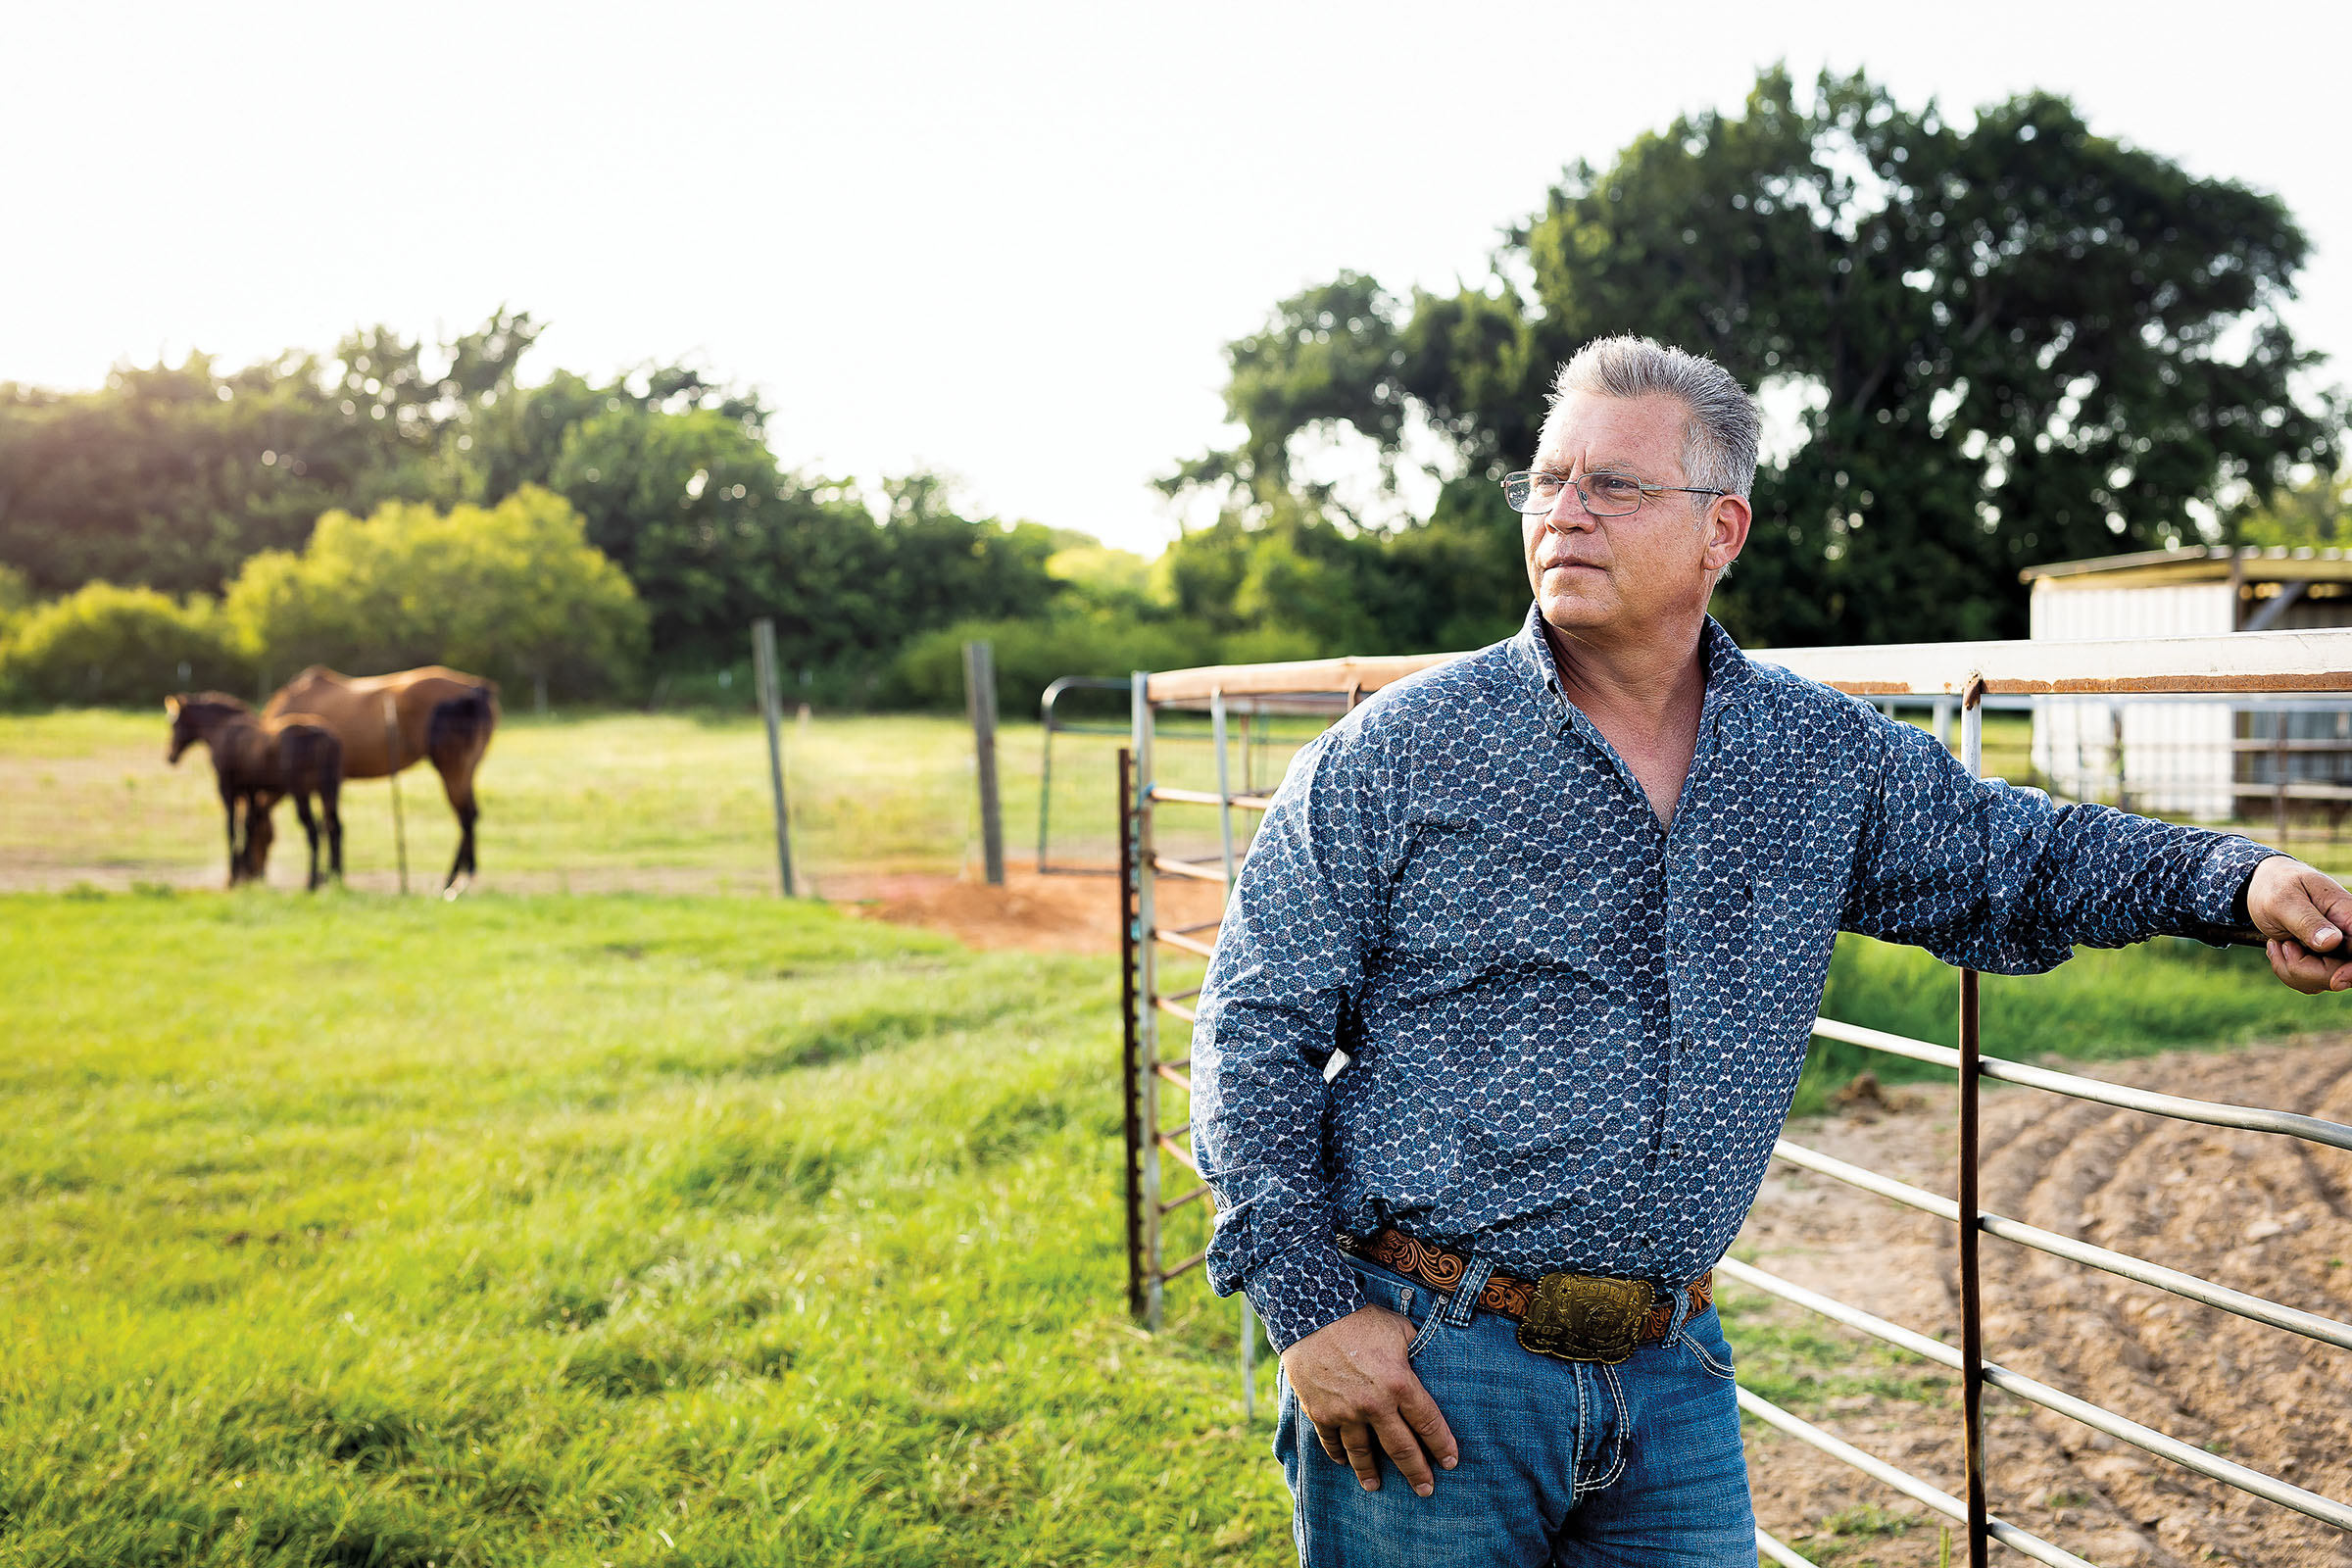 A man in a blue shirt and blue jeans looks off into the distance with his hand in his pocket - standing in a large green pasture